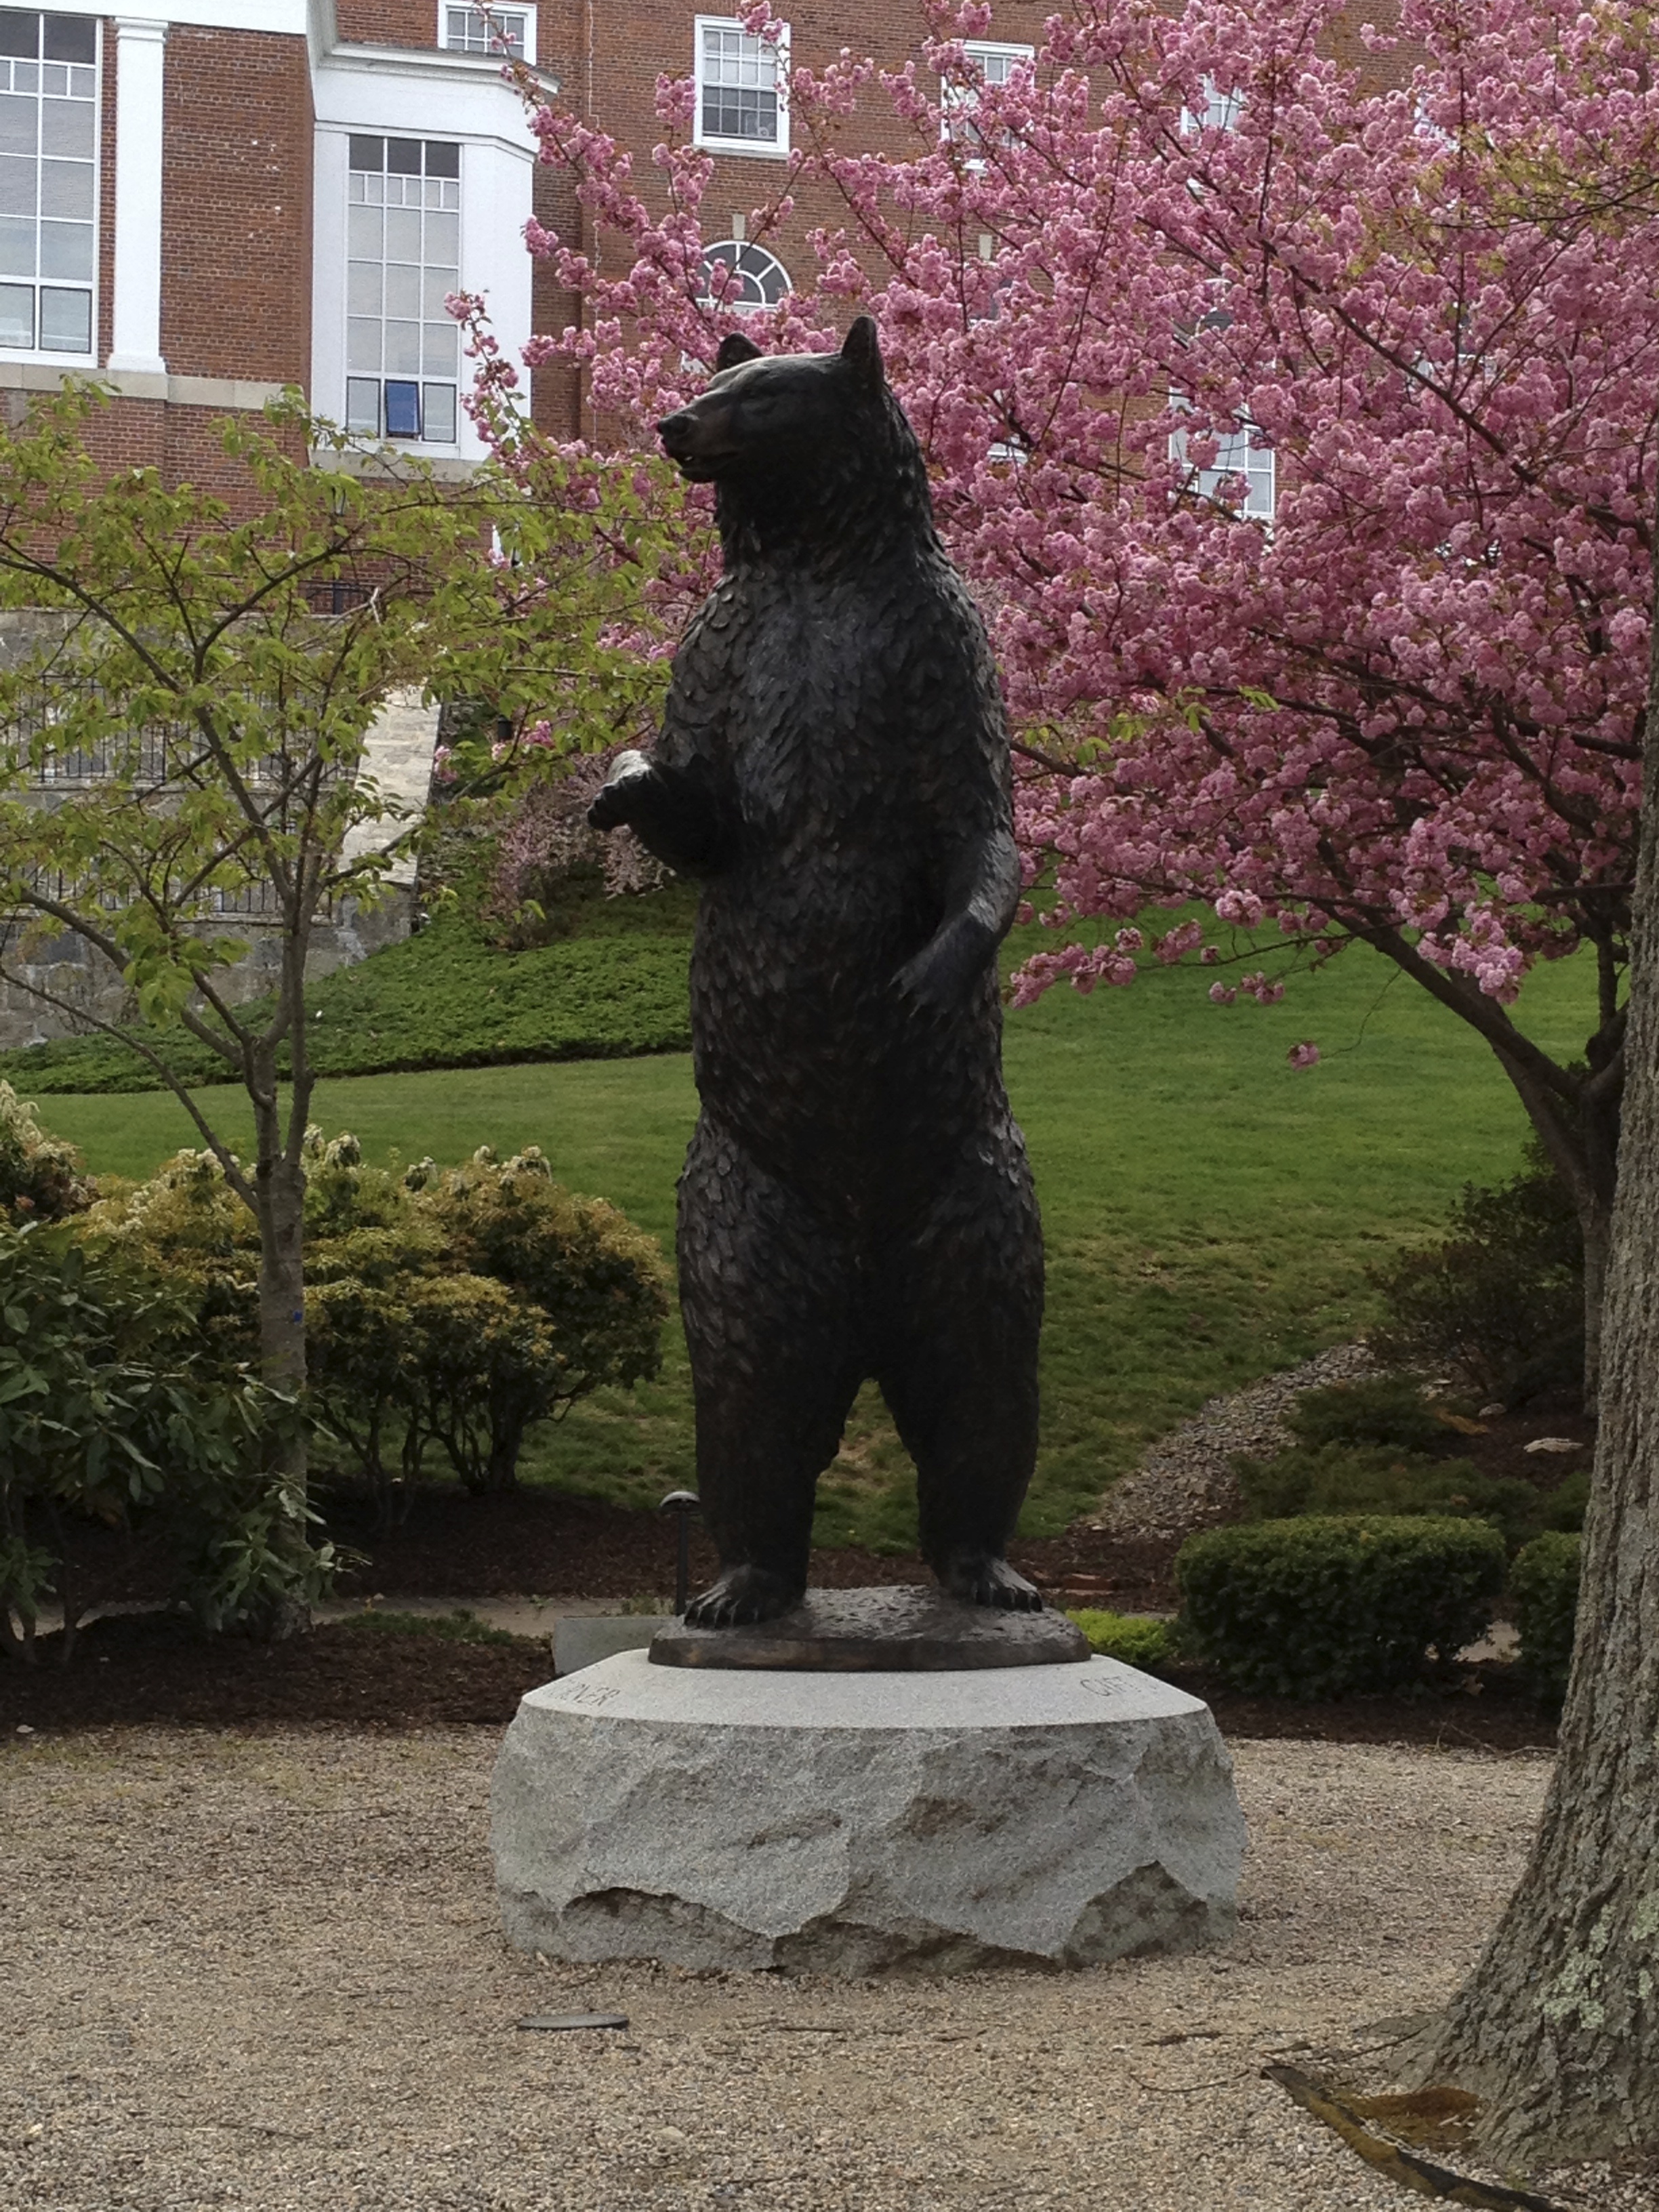 Bear statue on the grounds of the U.S. Coast Guard Academy in New London, CT. April 2012.